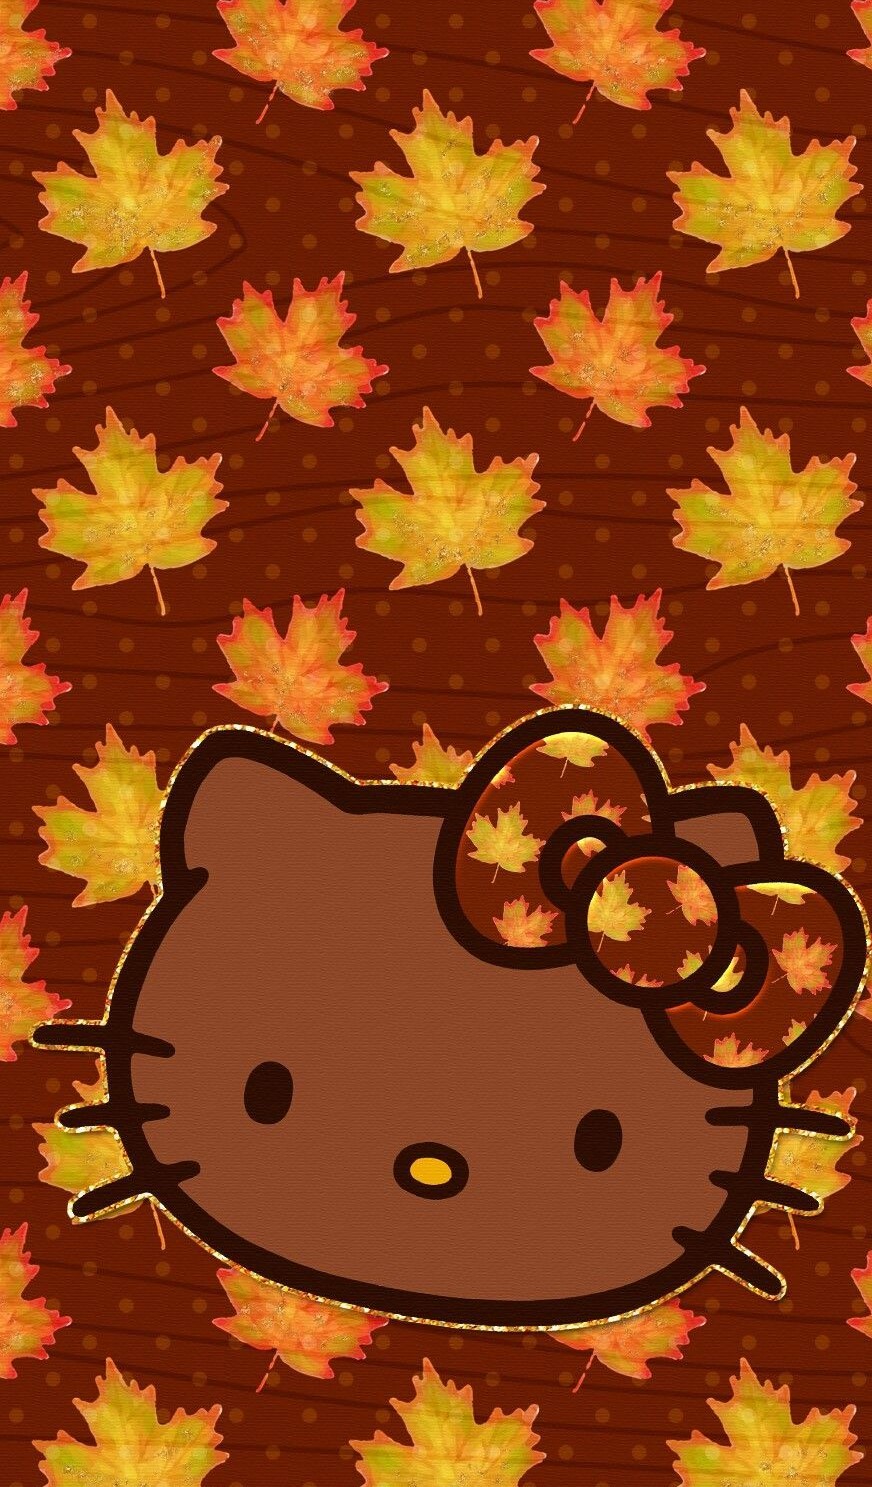 Hello Kitty Thanksgiving Wallpaper 72 images